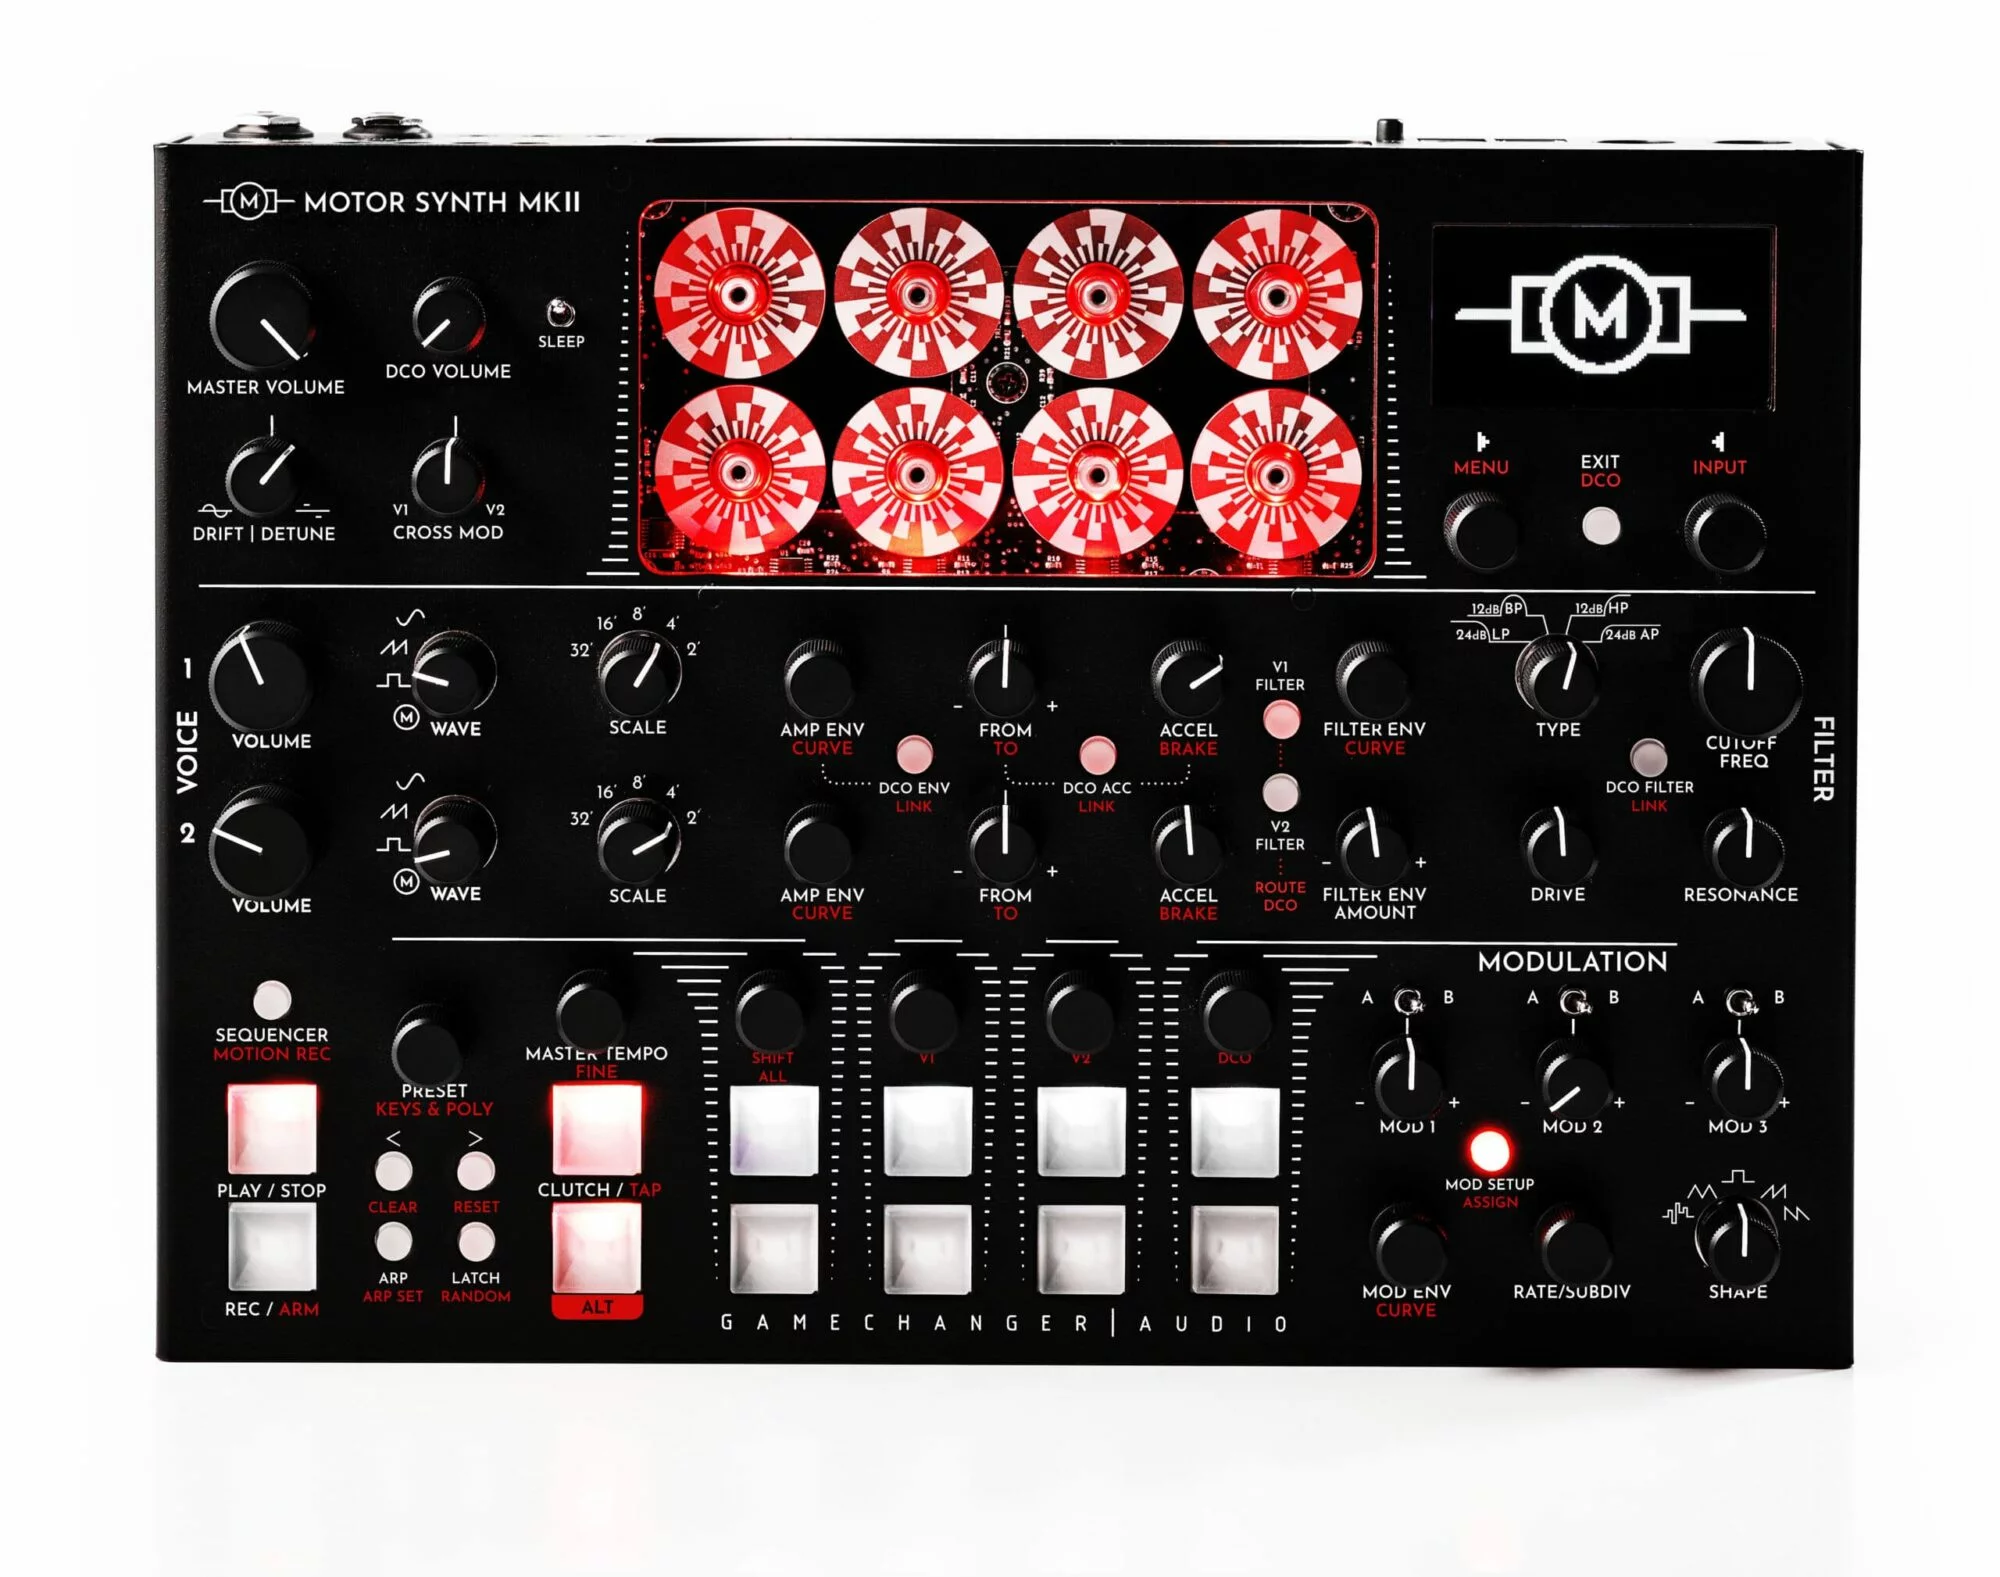 Front-facing motor synth mk 2 on white background